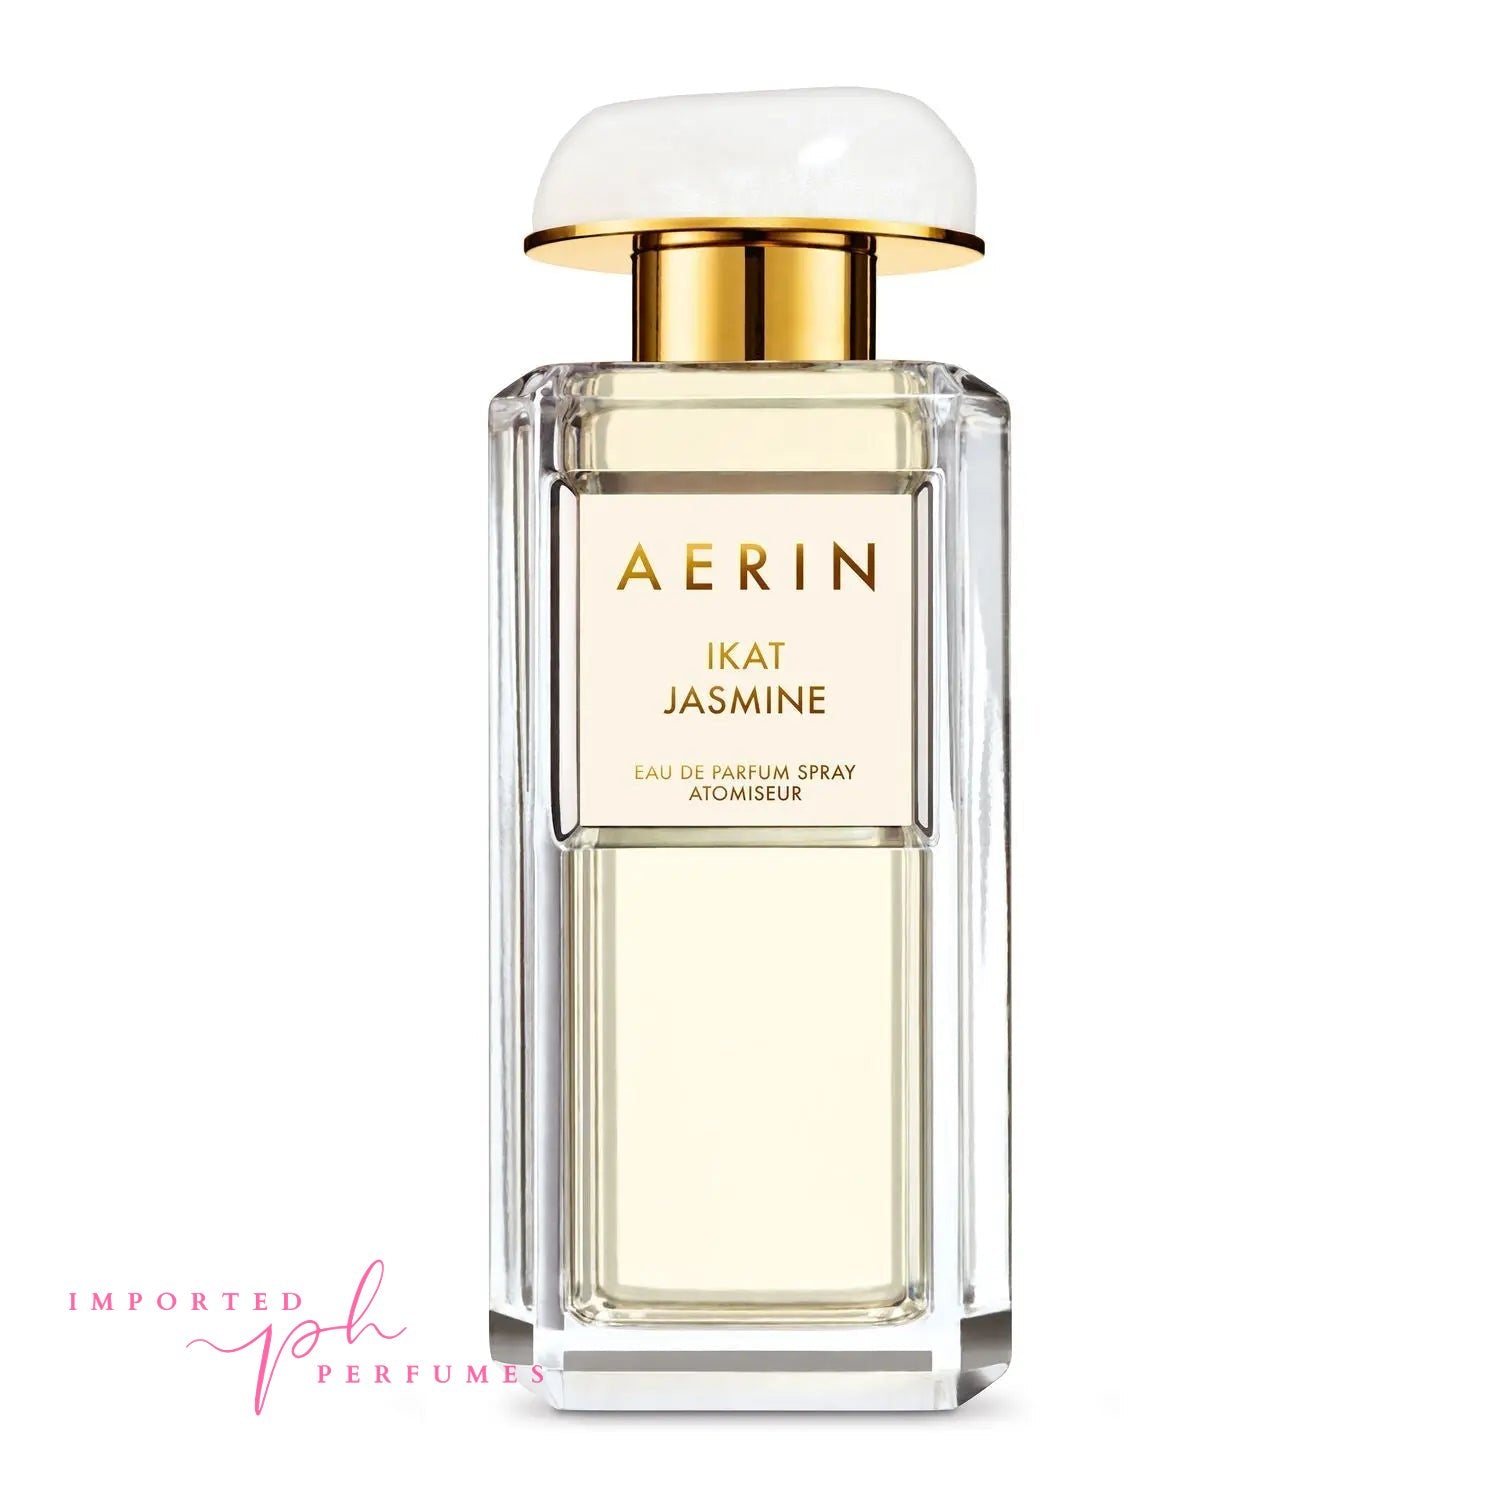 [TESTER] Ikat Jasmine By Aerin Lauder EDP For Women 100ml Imported Perfumes & Beauty Store